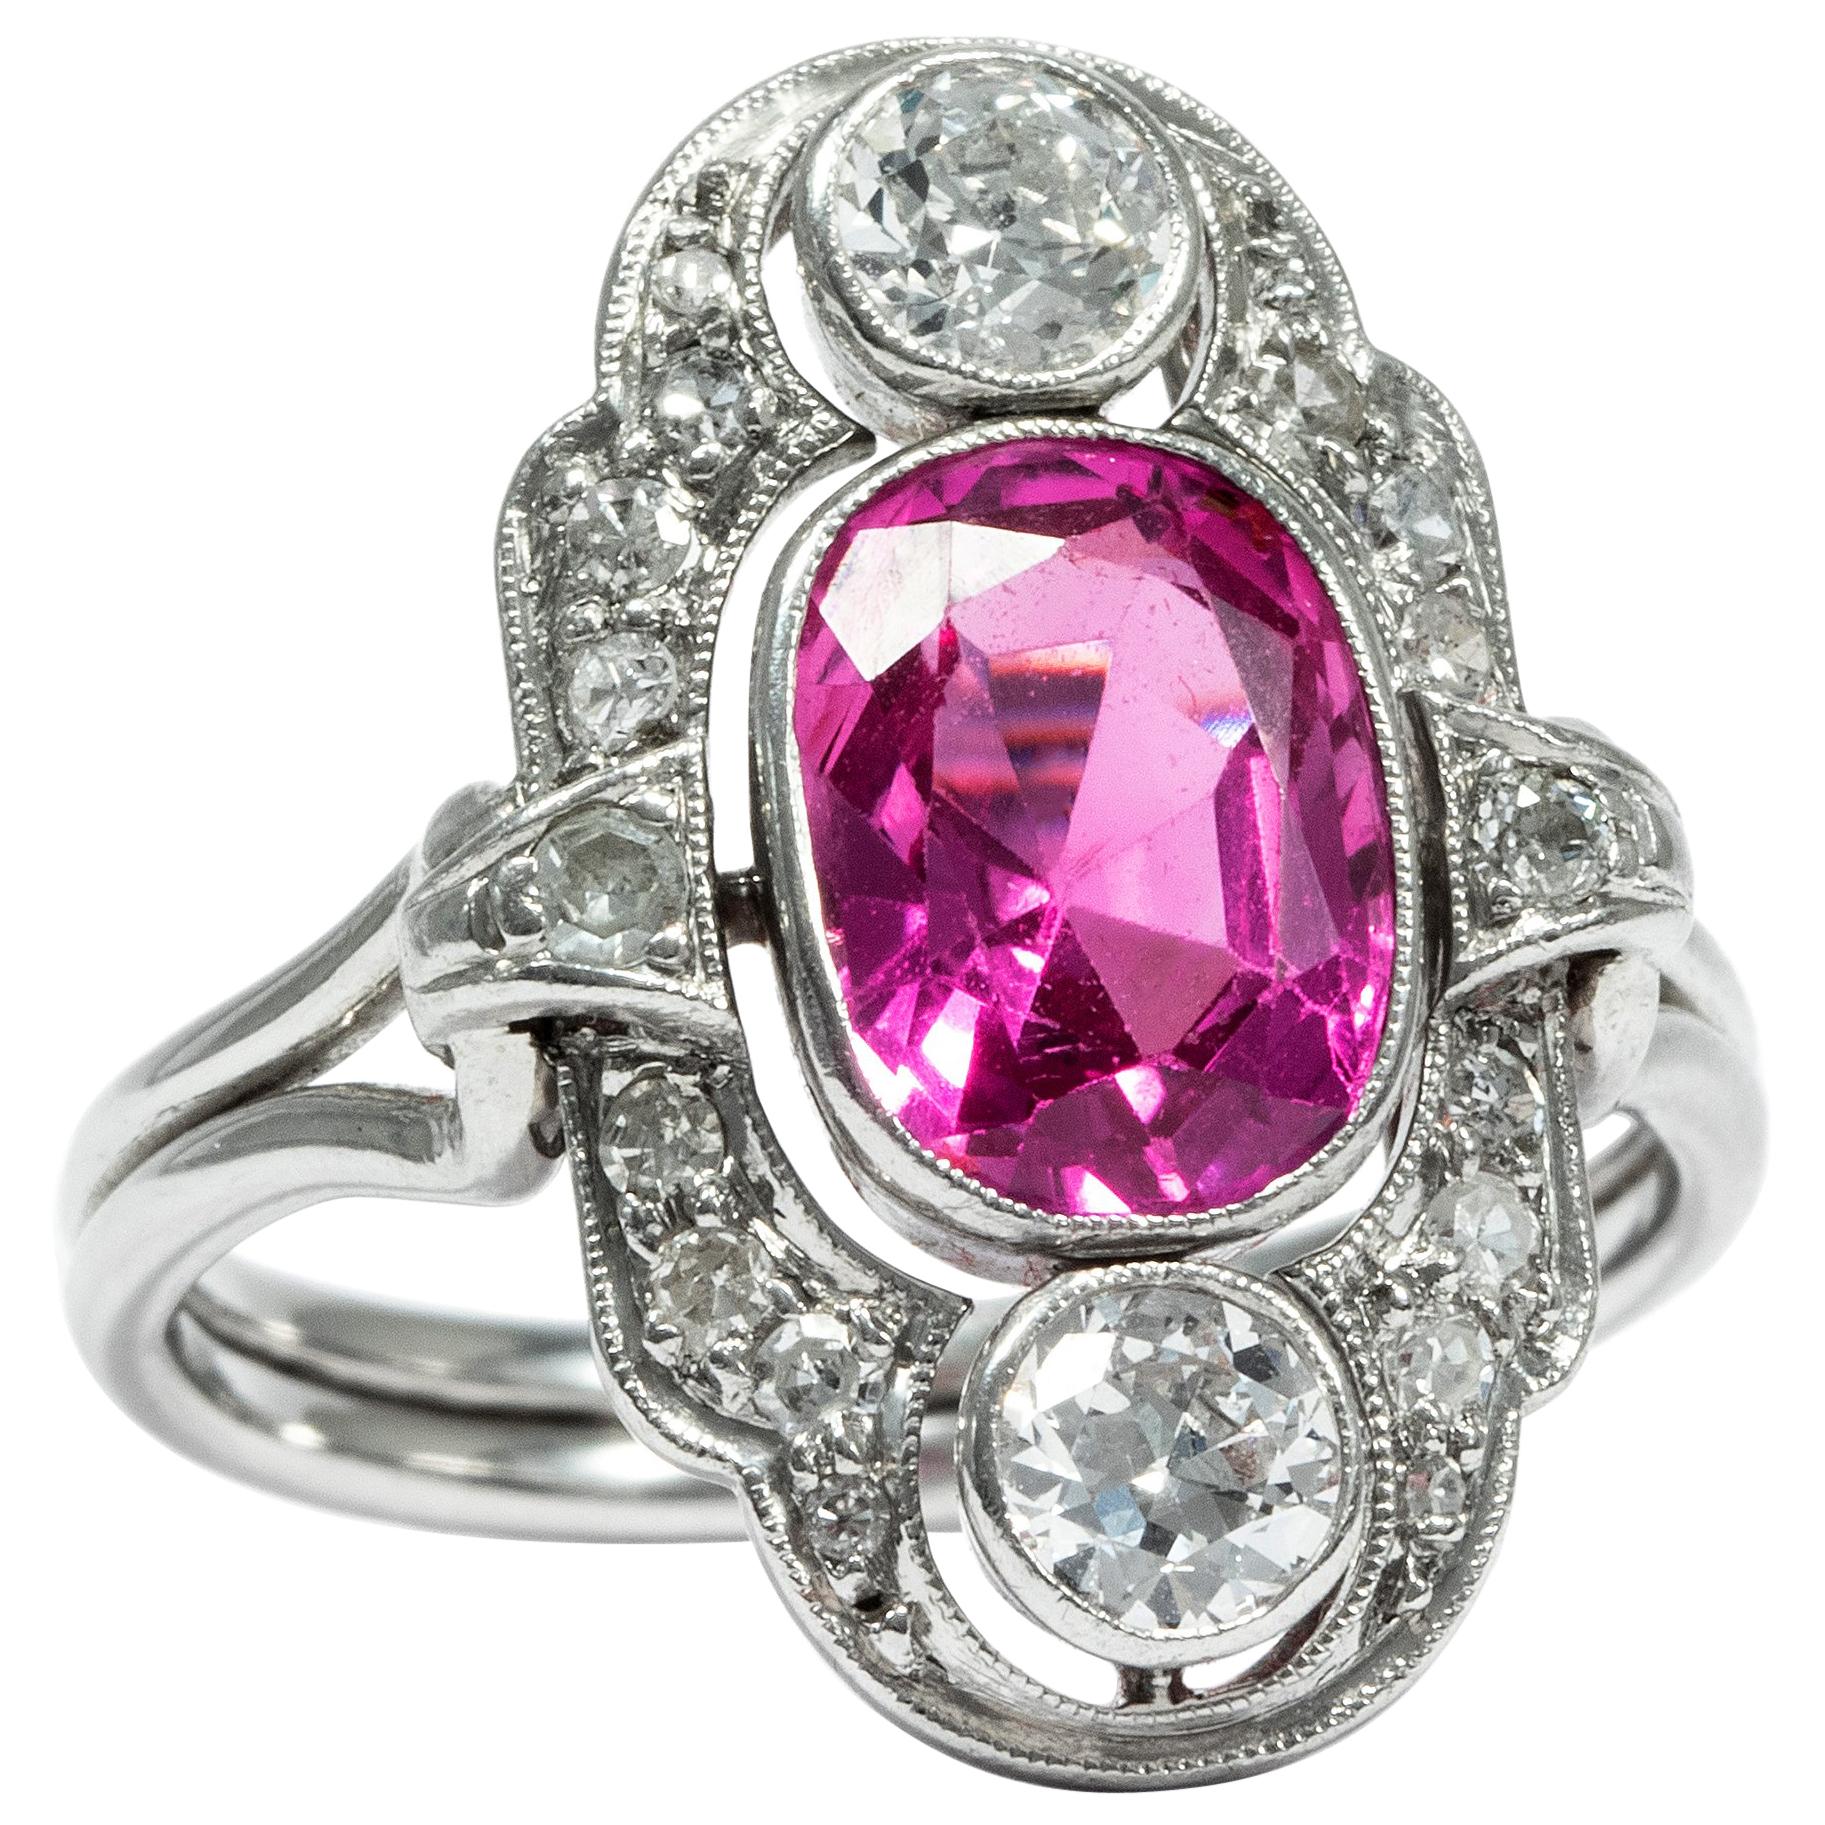 In the years around 1930, the Art Déco era favoured exquisite materials, geometric designs and white metals – and the ring at hand embodies this taste par excellence. A wonderful, natural sapphire in a vivid pink is the focal point of the design.